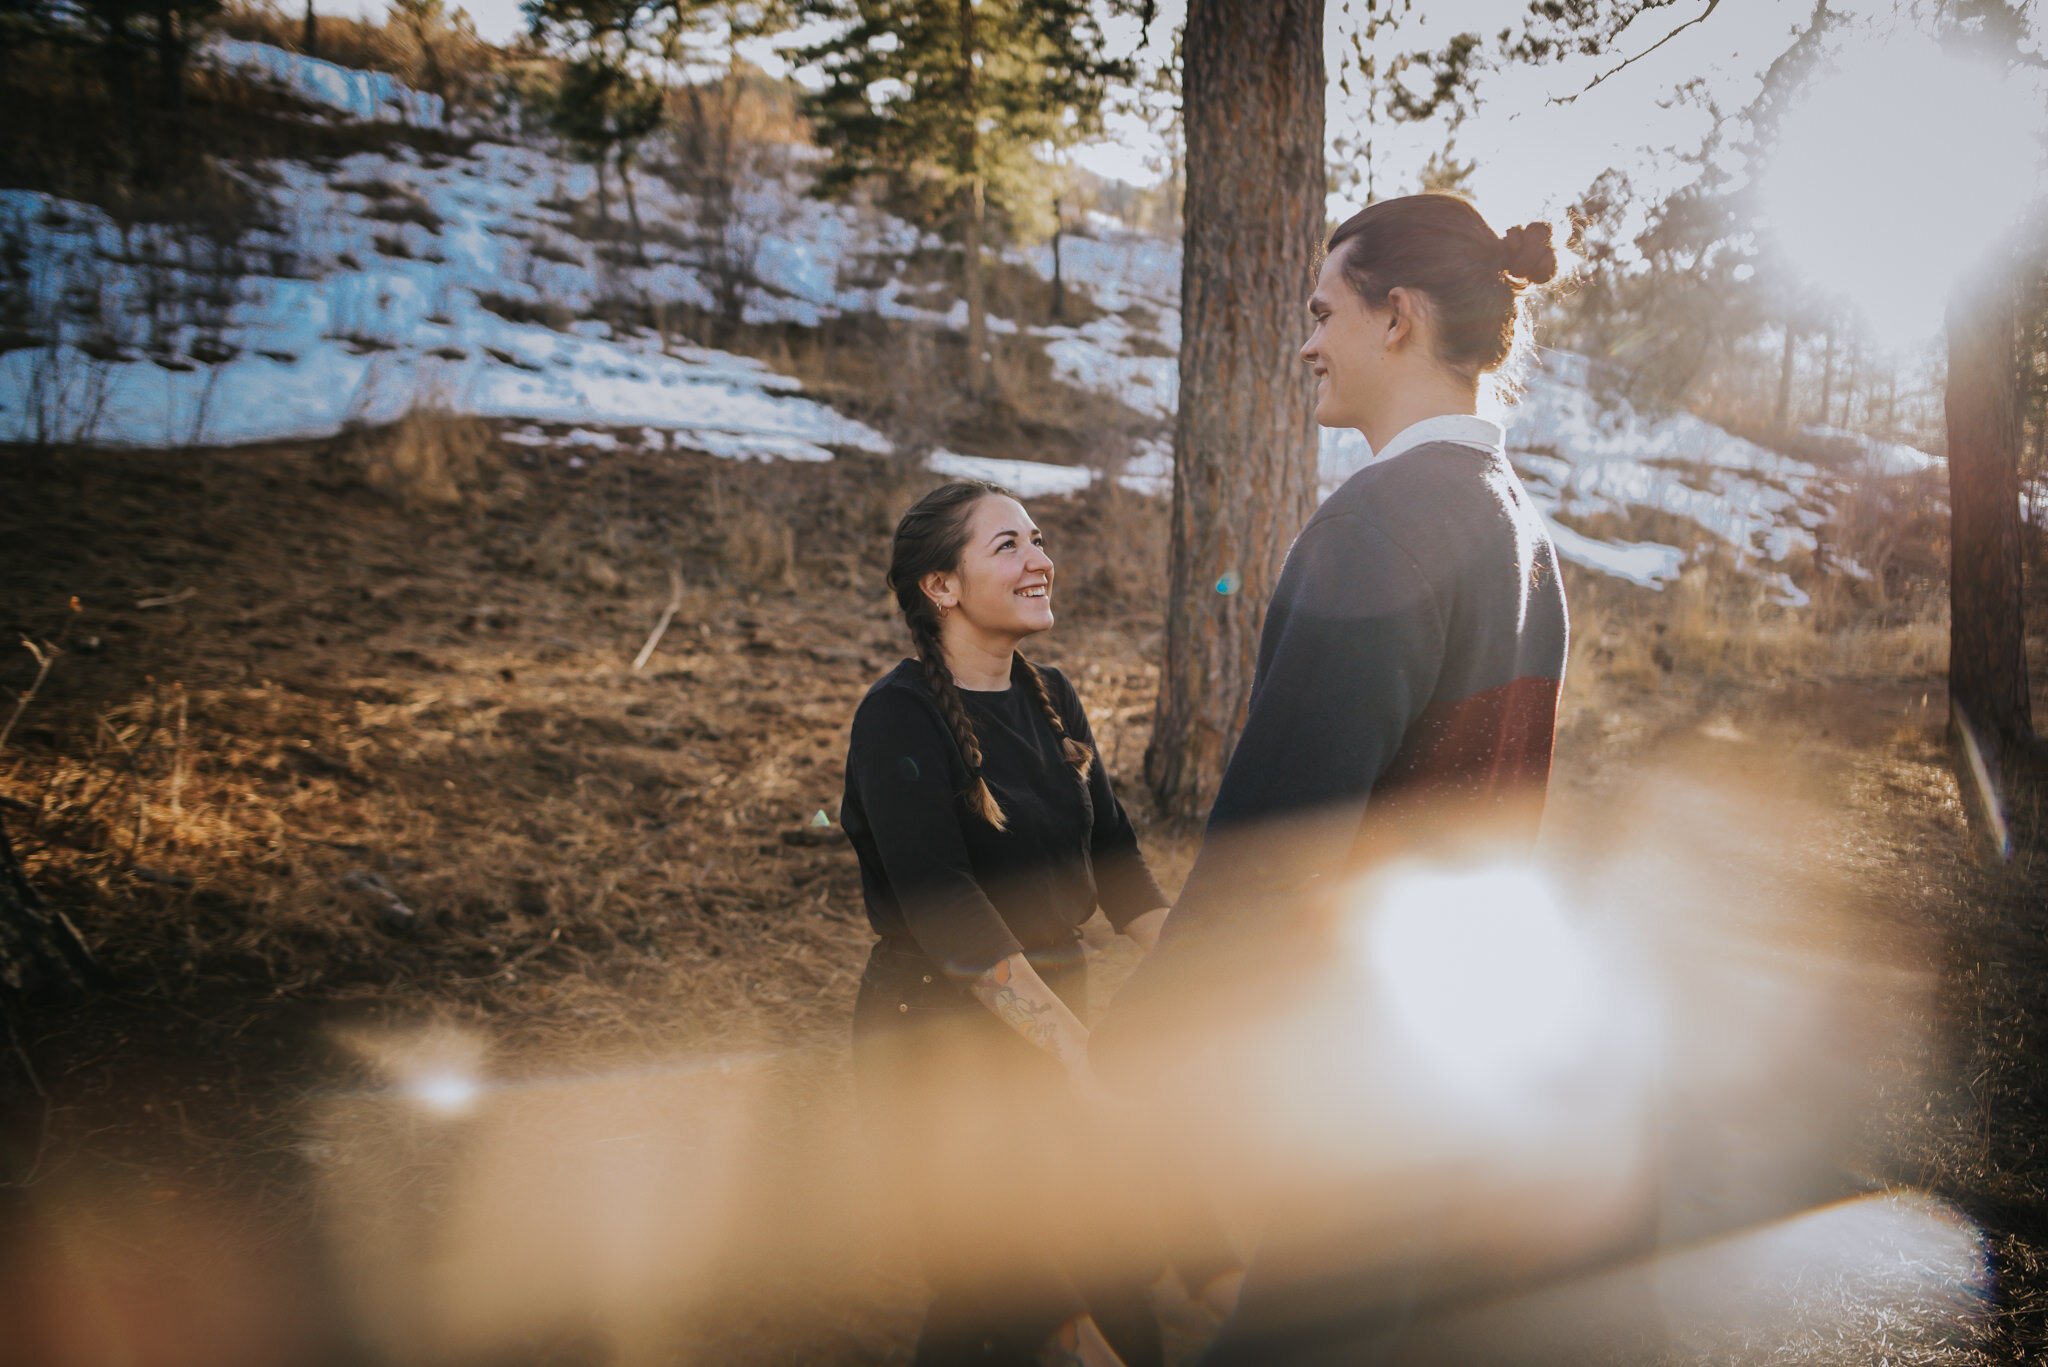 Yulia+and+Logan+Couples+Session+Colorado+Springs+Colorado+Sunset+Cheyenne+Canyon+Husband+Wife+Wild+Prairie+Photography-01-2020.jpeg